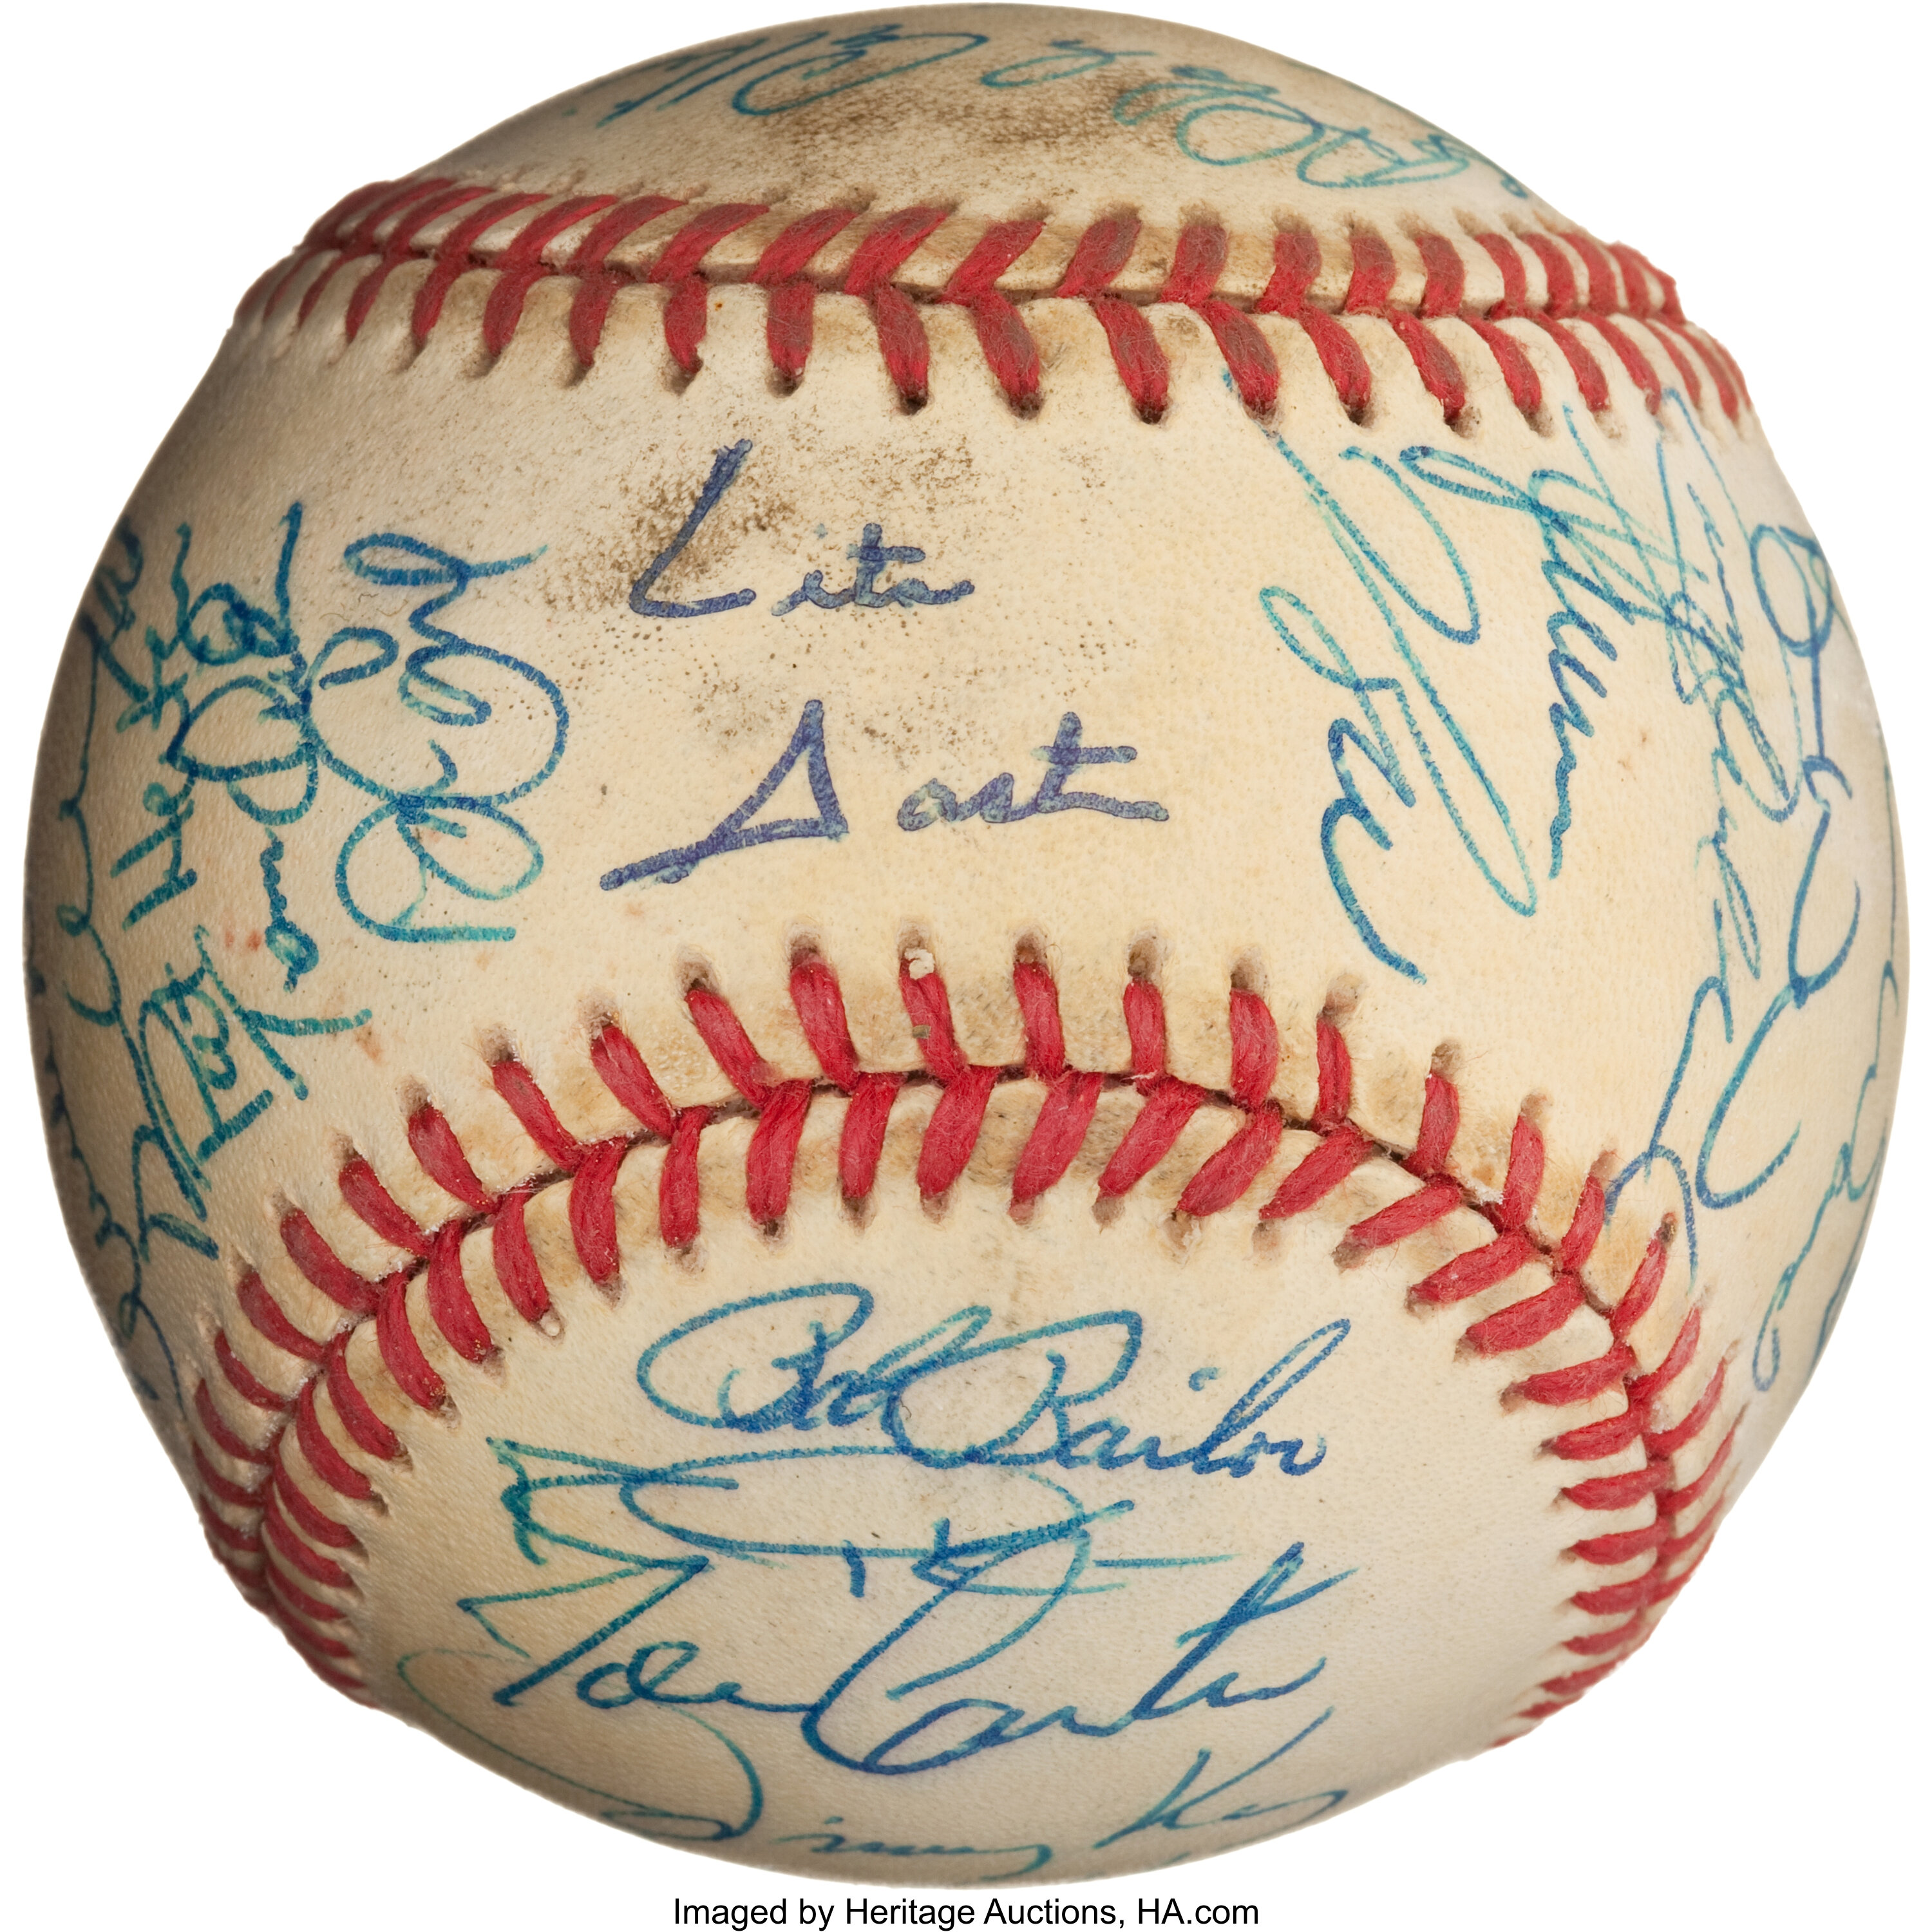 Baseball from the 1992 World Series autographed by Joe Carter